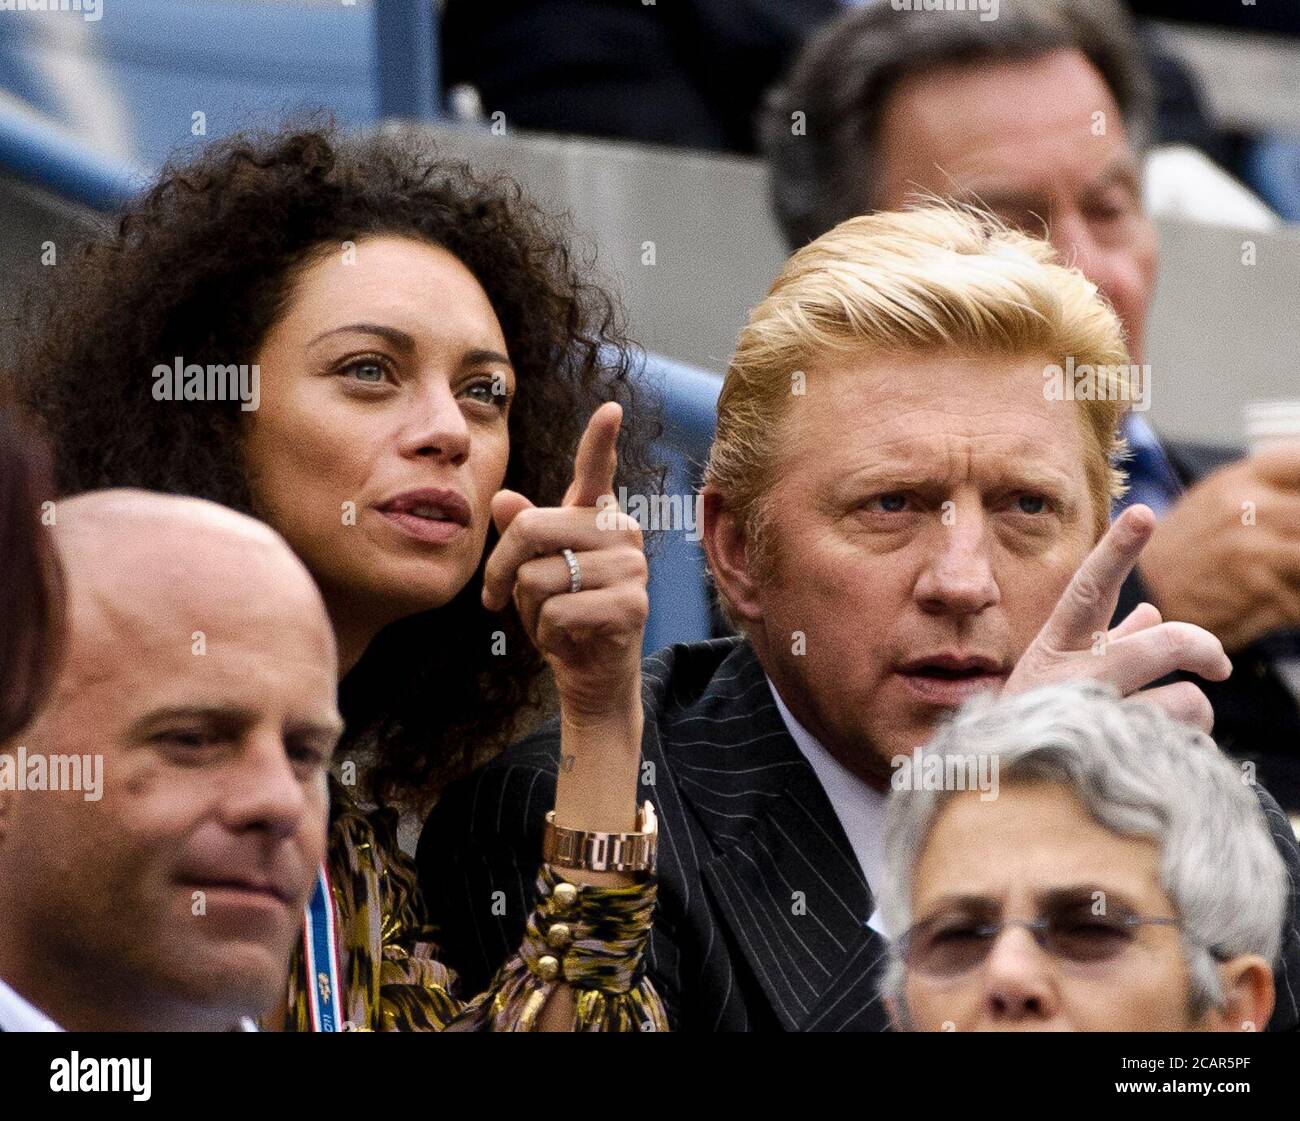 Queens, United States Of America. 11th Sep, 2011. NEW YORK, NY - SEPTEMBER11: Boris Becker Sharlely Lilly Kerssenberg watches Samantha Stosur of Australia (AUS) defeat American Serena Williams (USA) to win the Woman's Singles Championship on Day 14 of the 2011 U.S. Open Tennis Championships at the USTA Billie Jean King National Tennis Center on September 11, 2011 in the Flushing neighborhood of the Queens borough of New York City. People: Boris Becker Sharlely Lilly Kerssenberg Credit: Storms Media Group/Alamy Live News Stock Photo